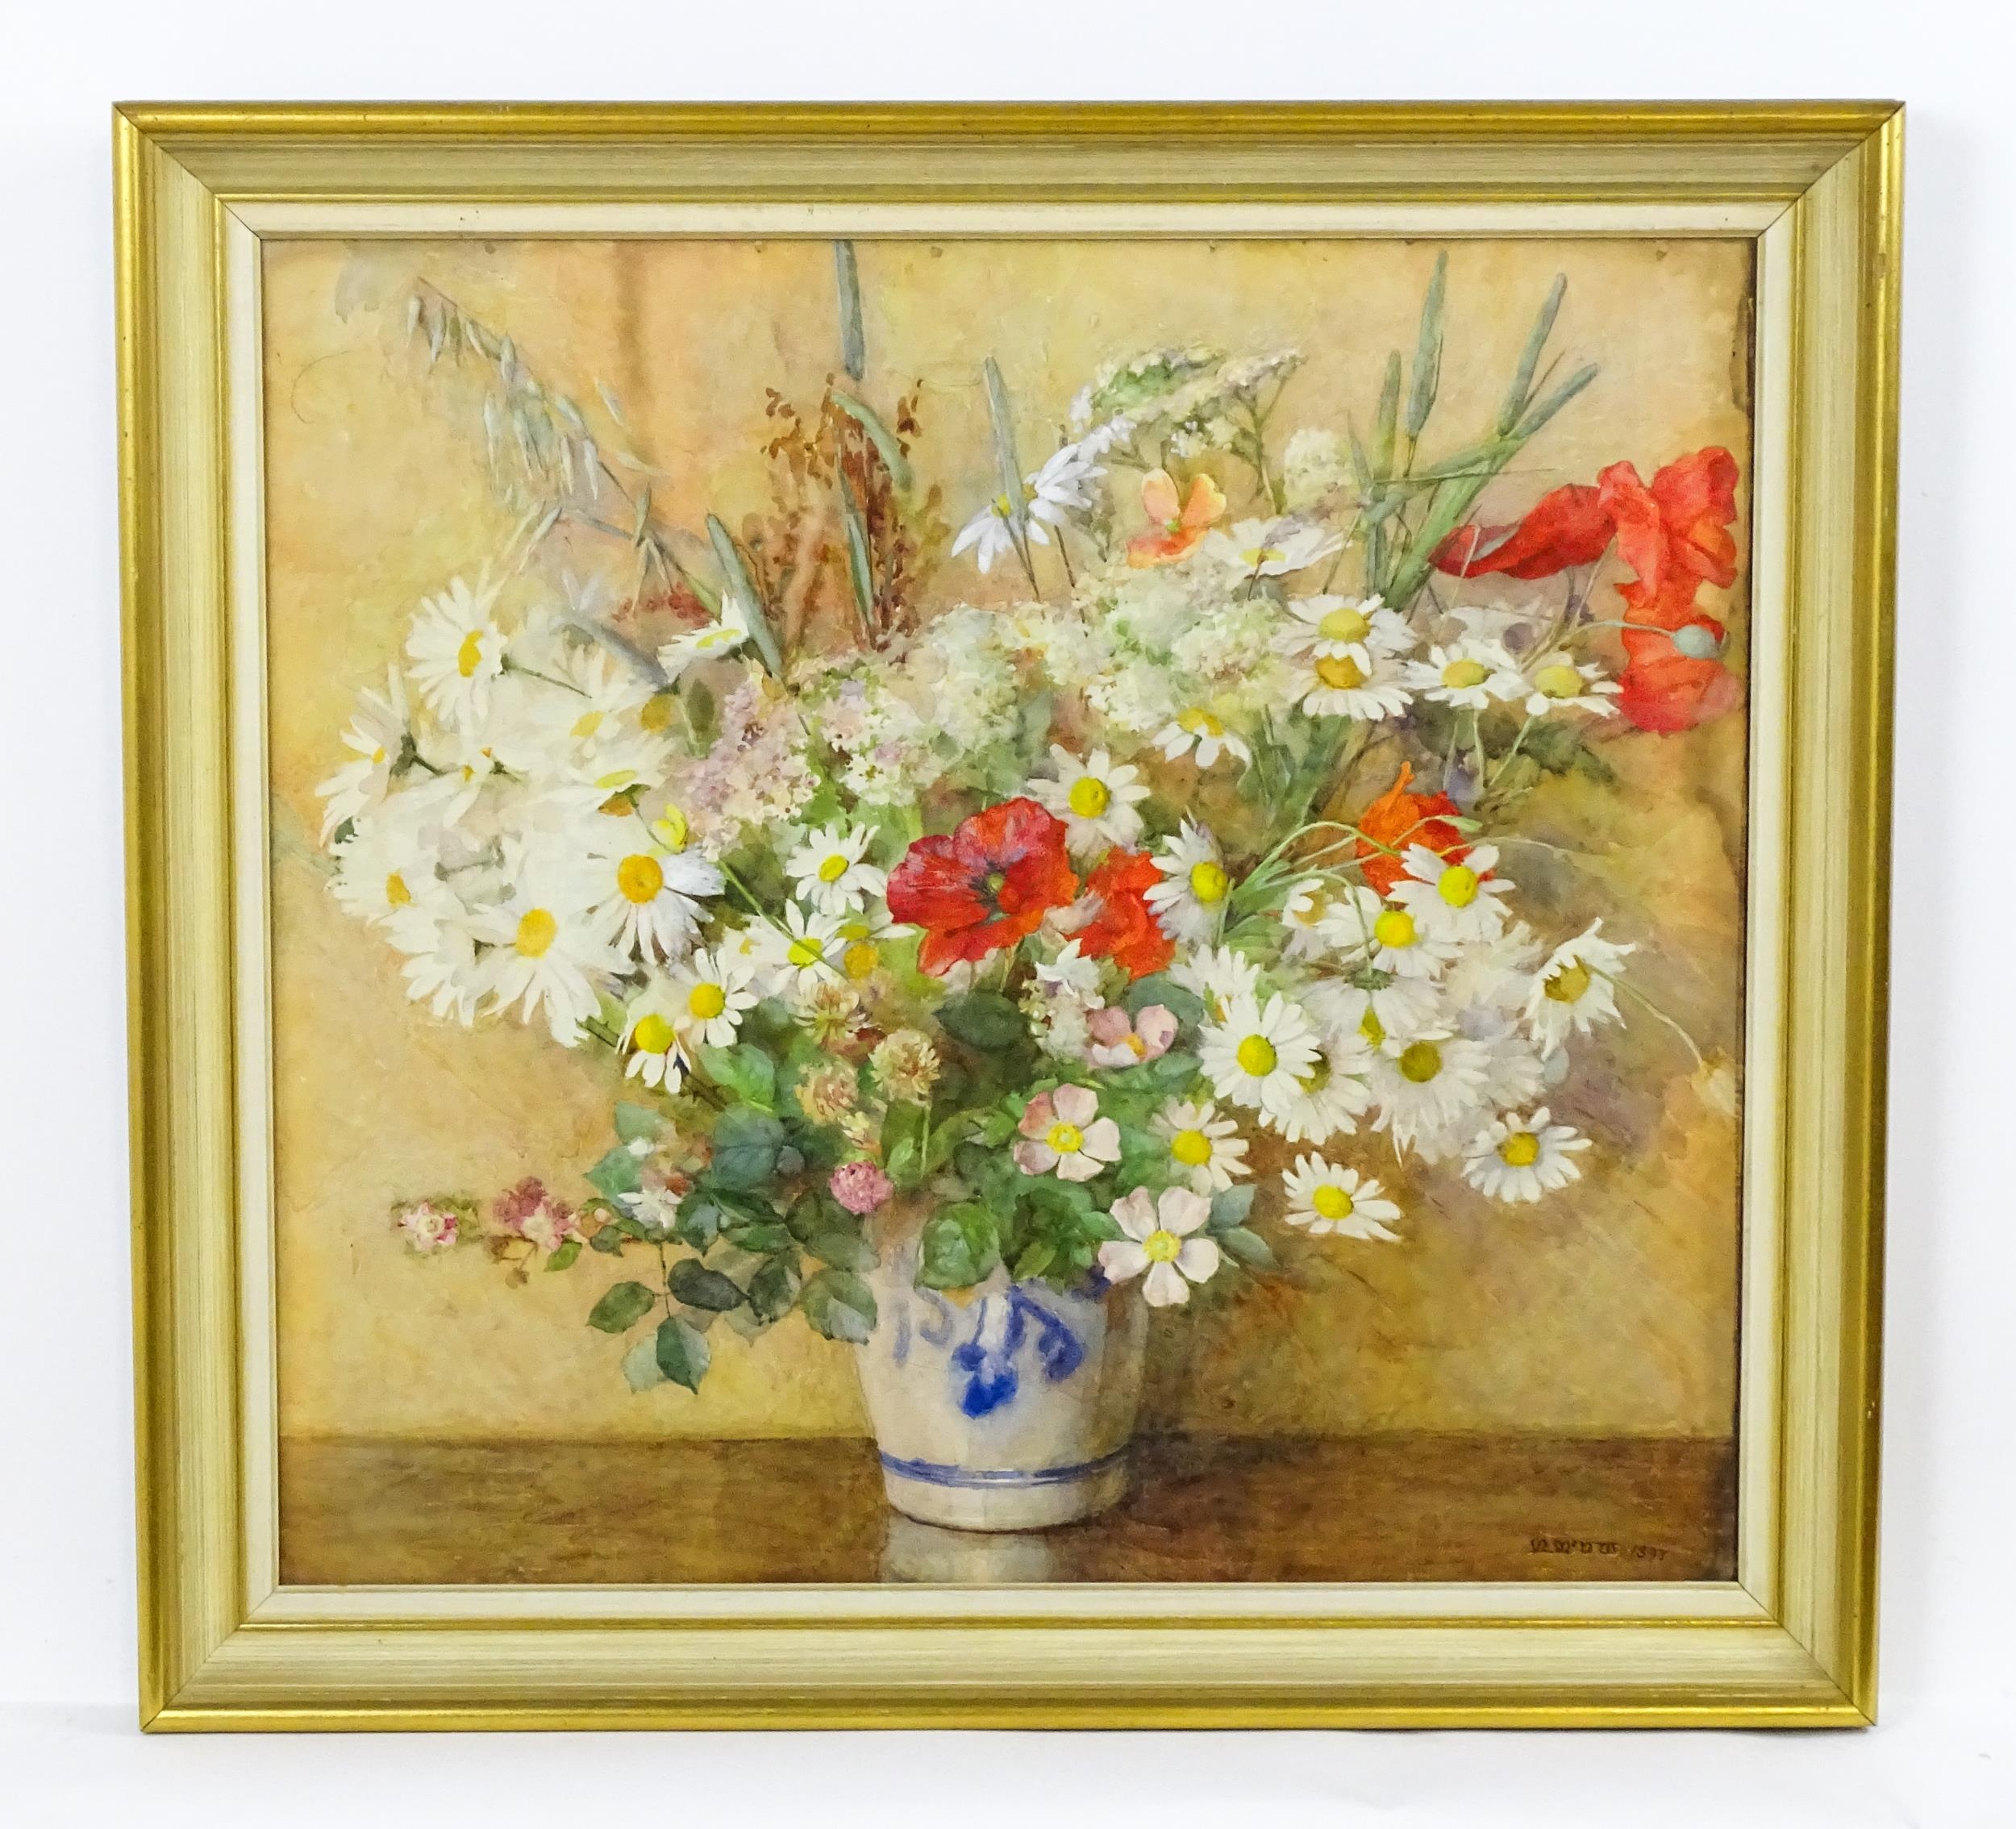 19th century, Watercolour, A still life study with flowers and foliage in a blue and white vase to